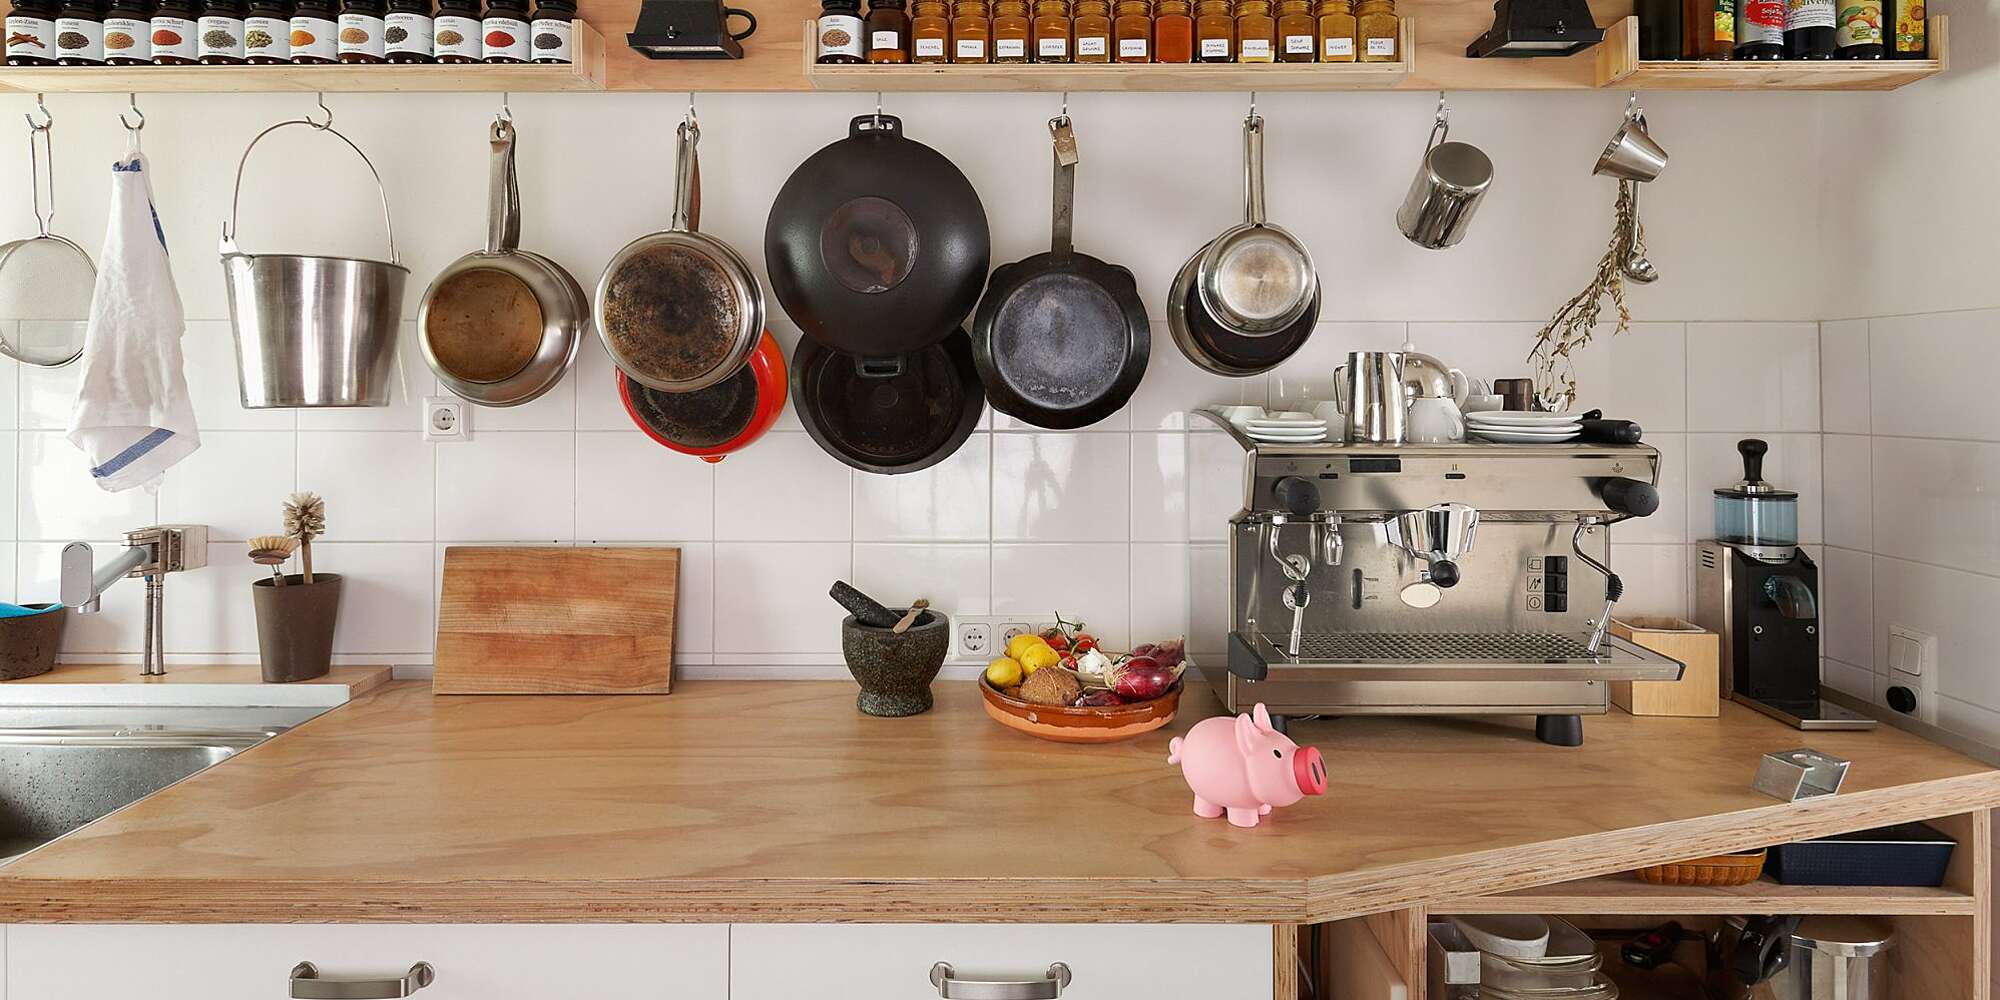 Must Have Kitchen Tools That Will Up Your Kitchen Game!